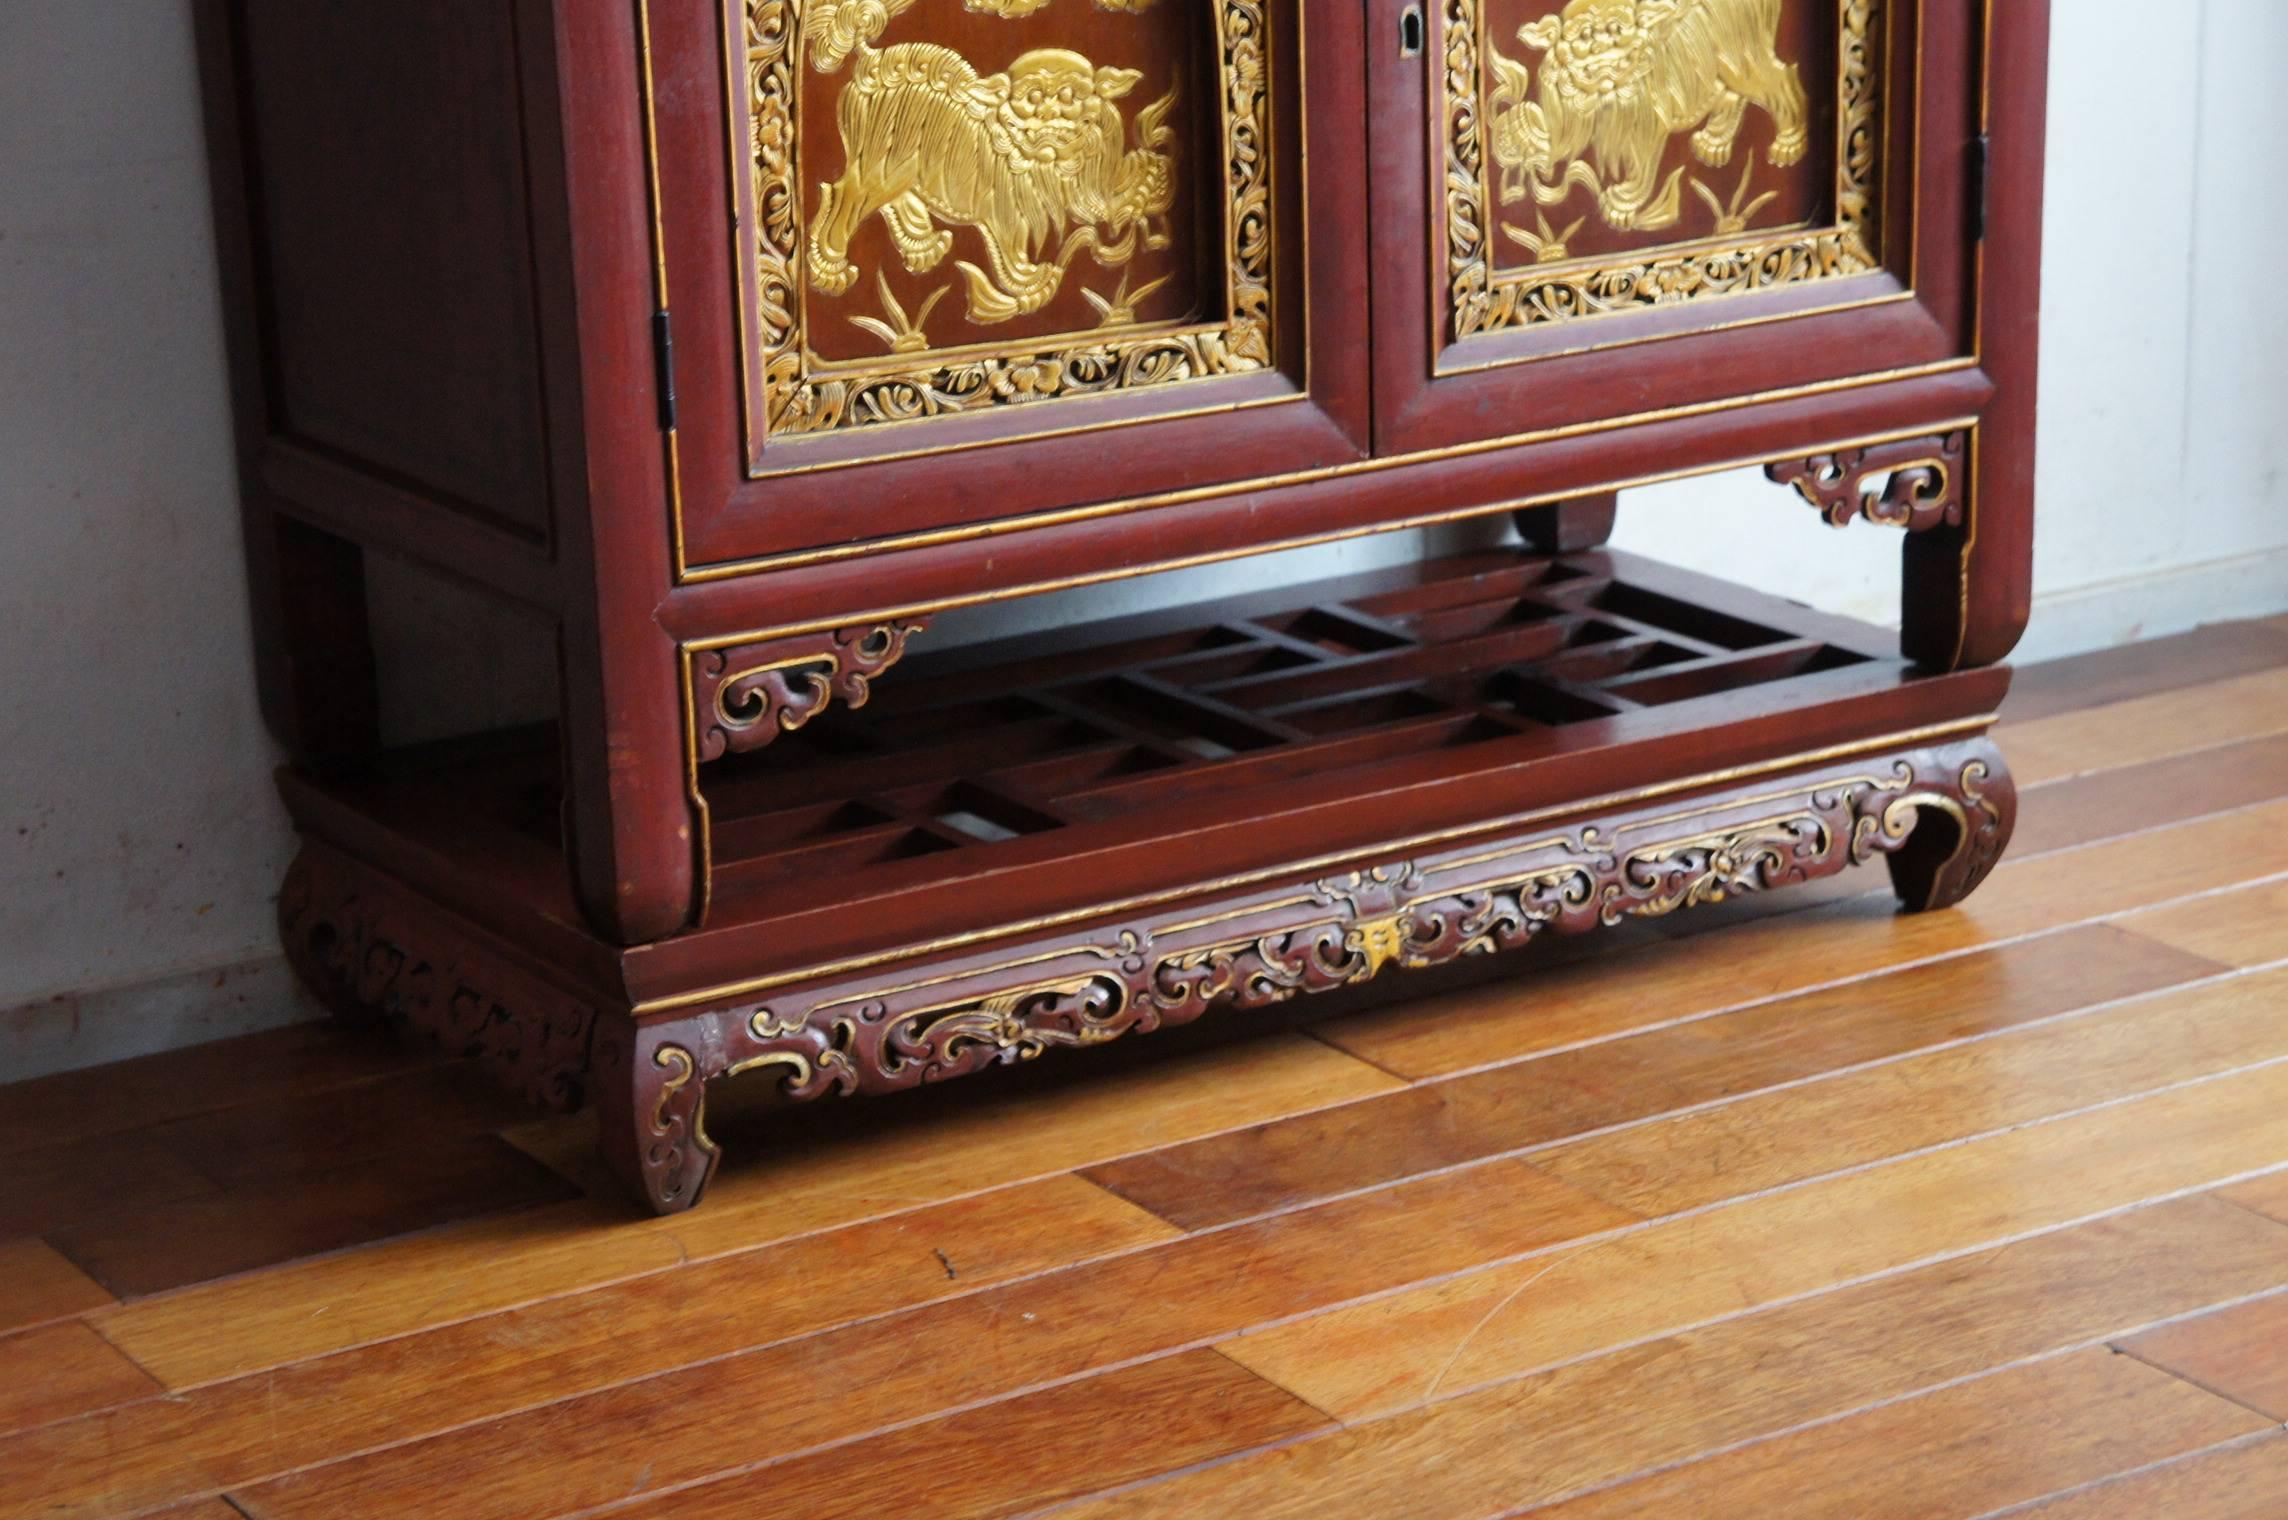 Chinese Export Rare 19th Century Hand-Carved & Red Laquered Cabinet with Golden Decor Sumatra